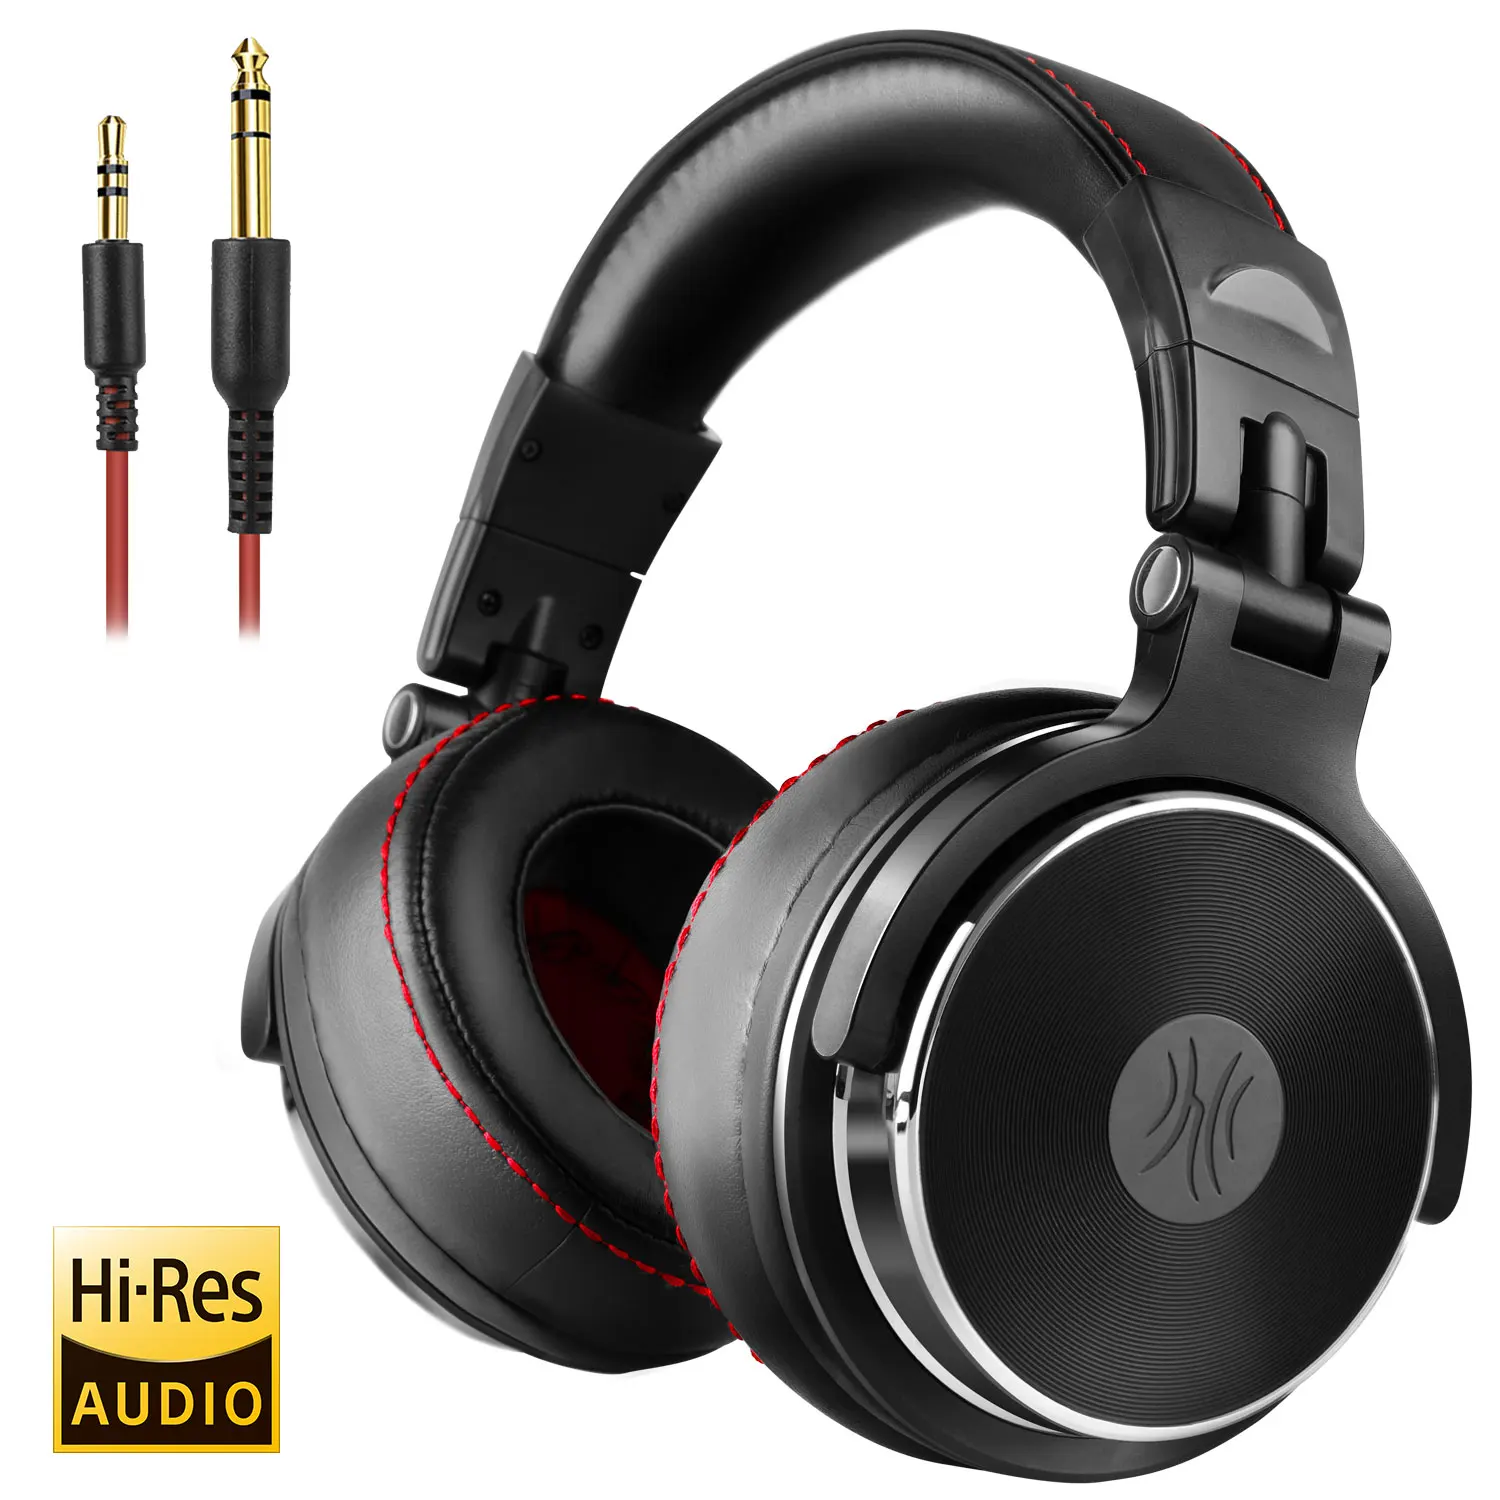 

Oneodio Pro 50 Headphones Professional Studio Dynamic Stereo DJ Headphone With Microphone HIFI Wired Headset Monitoring, Black